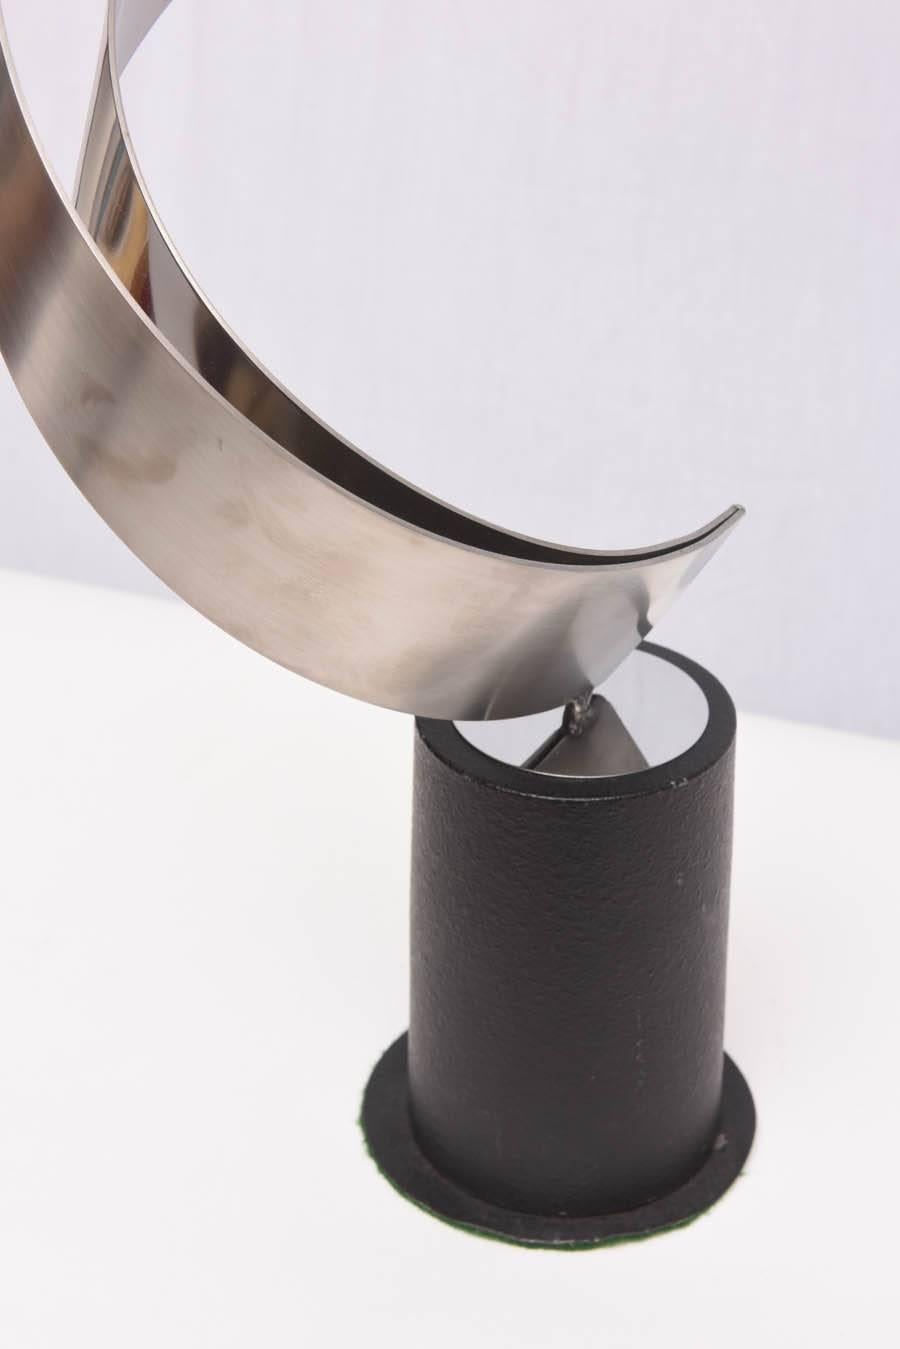 Late 20th Century Curtis Jere Swivel Swirl Sculpture in Chrome, 1970s, USA For Sale